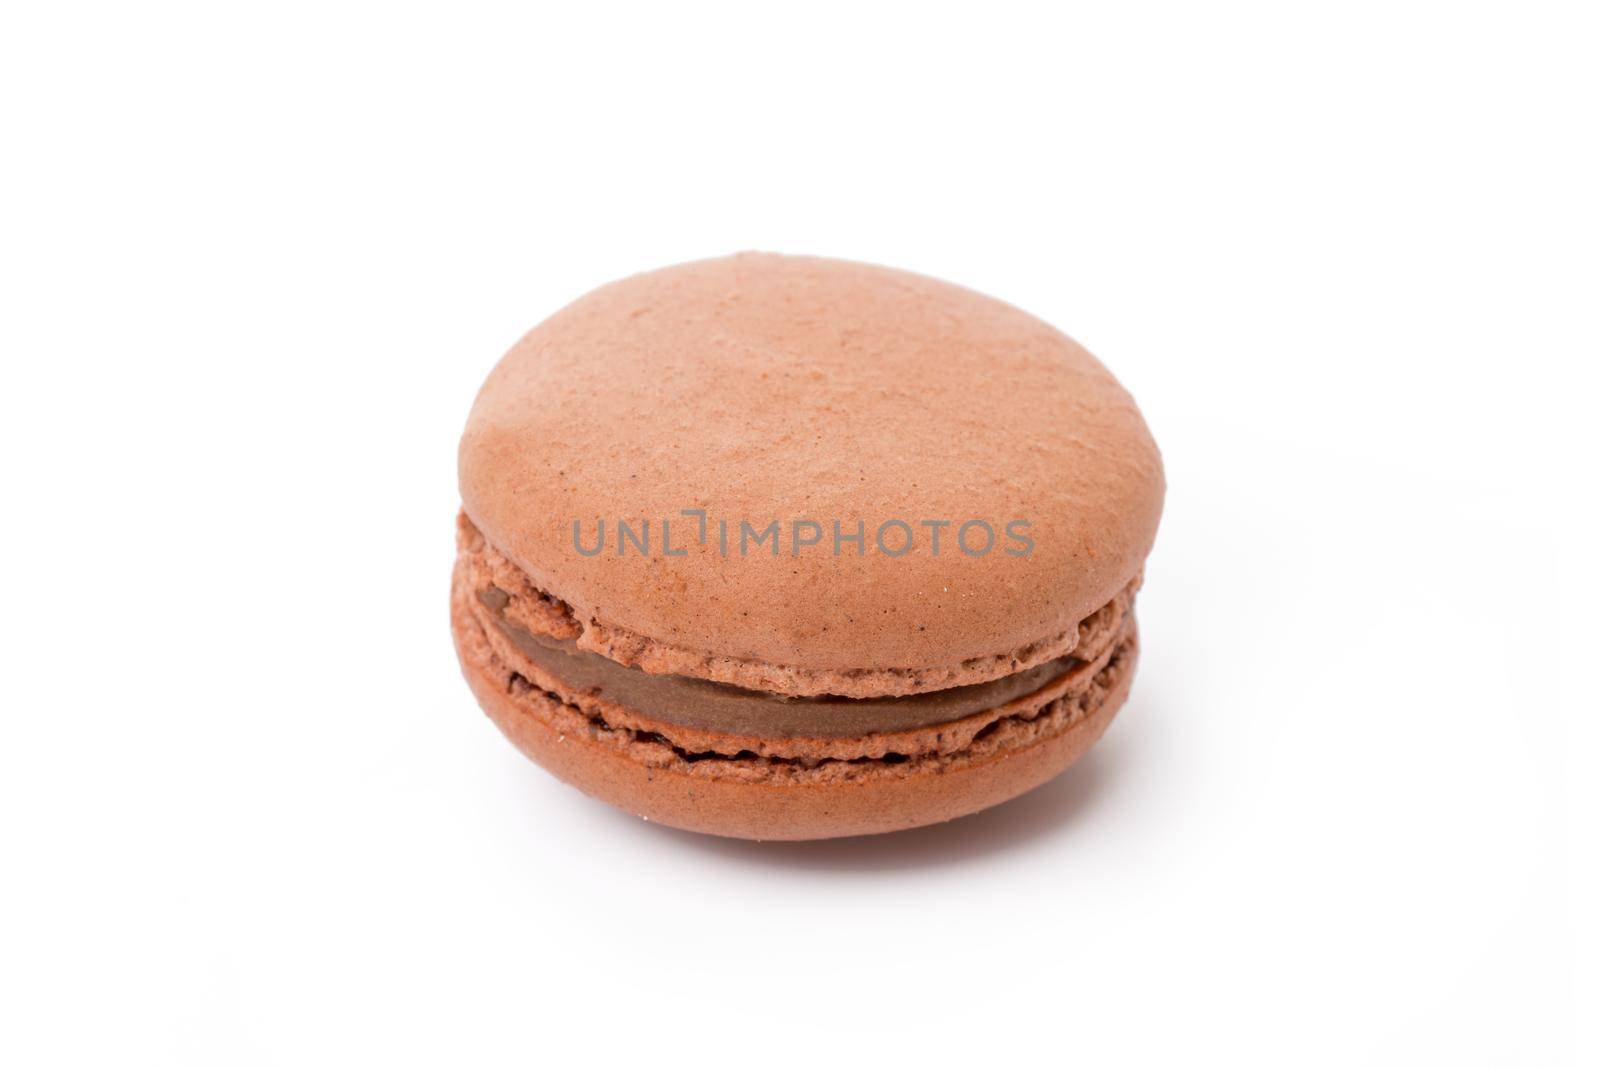 French colored macaroon cookie isolated on white background